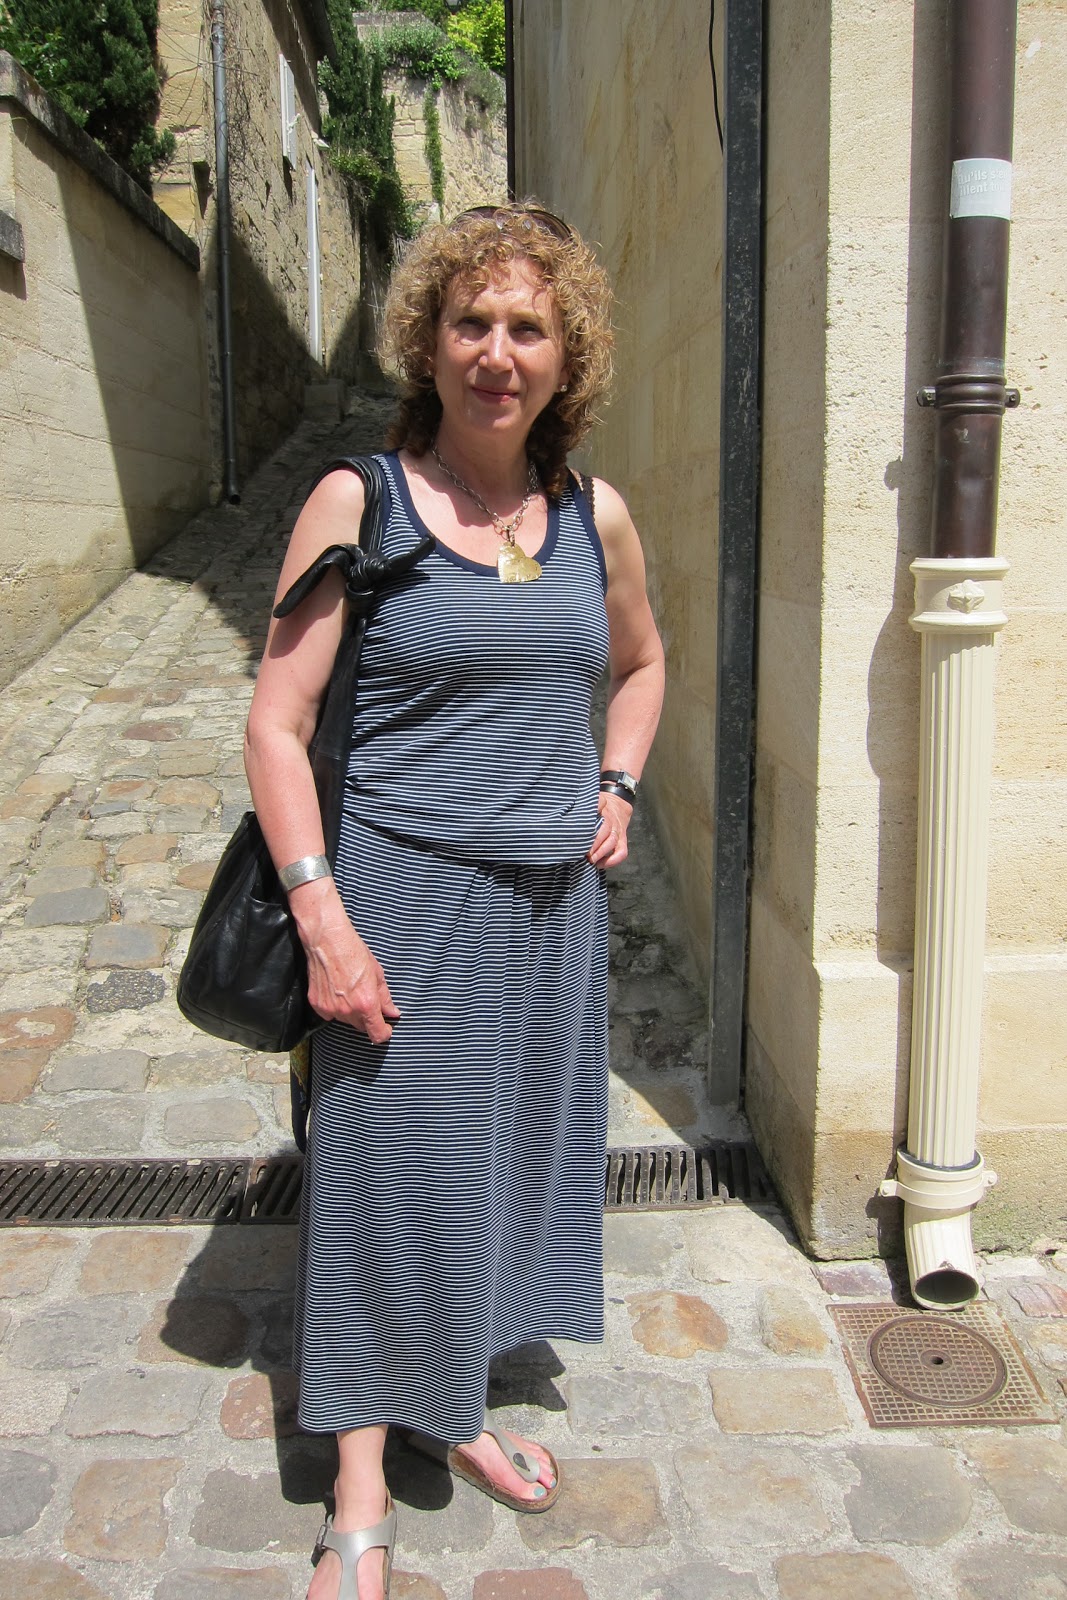 Visiting (and Sketching) St. Emilion